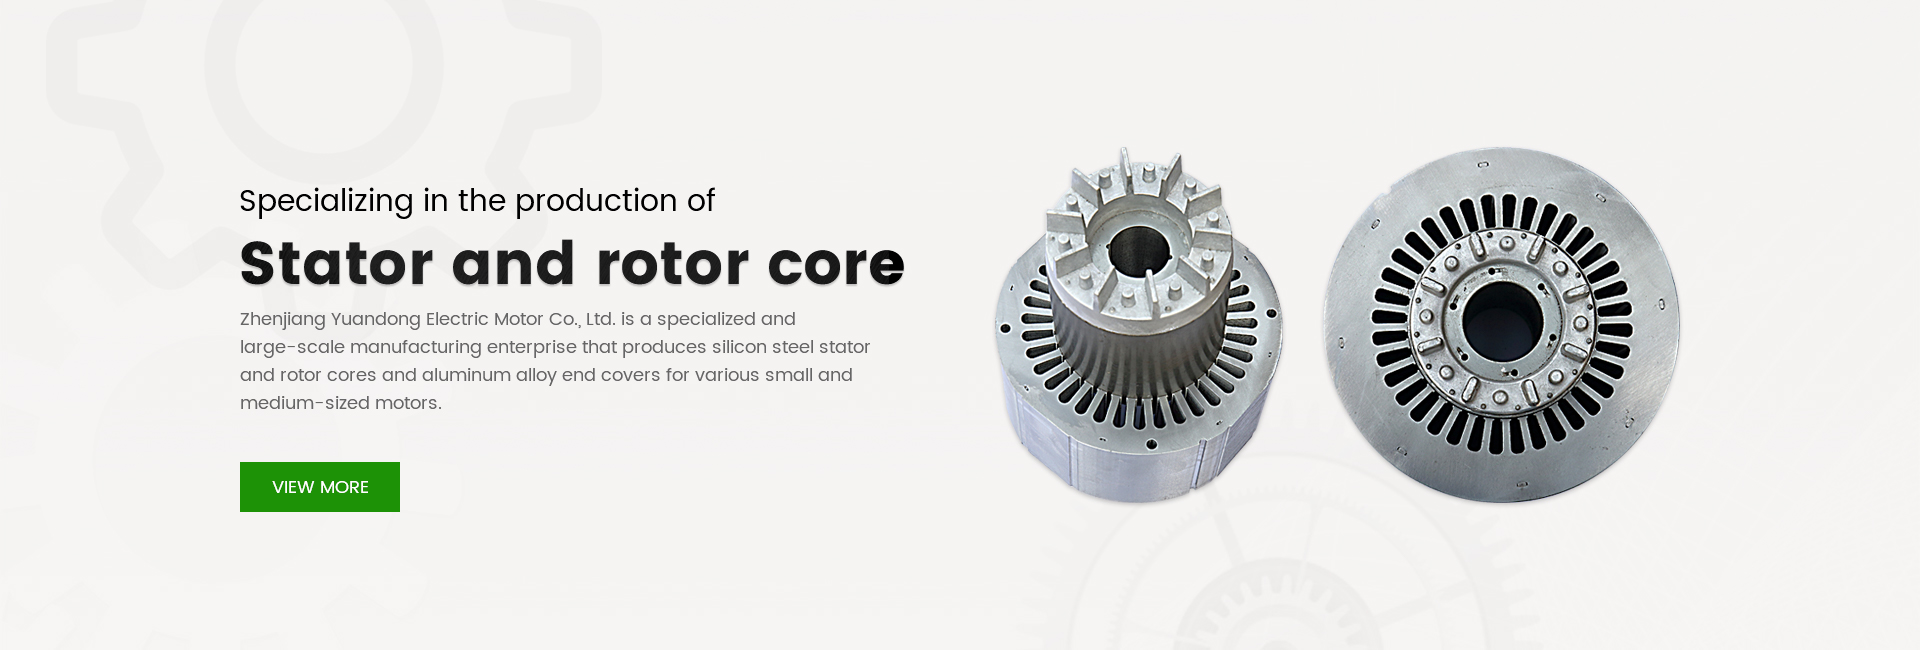 Stator and rotor core